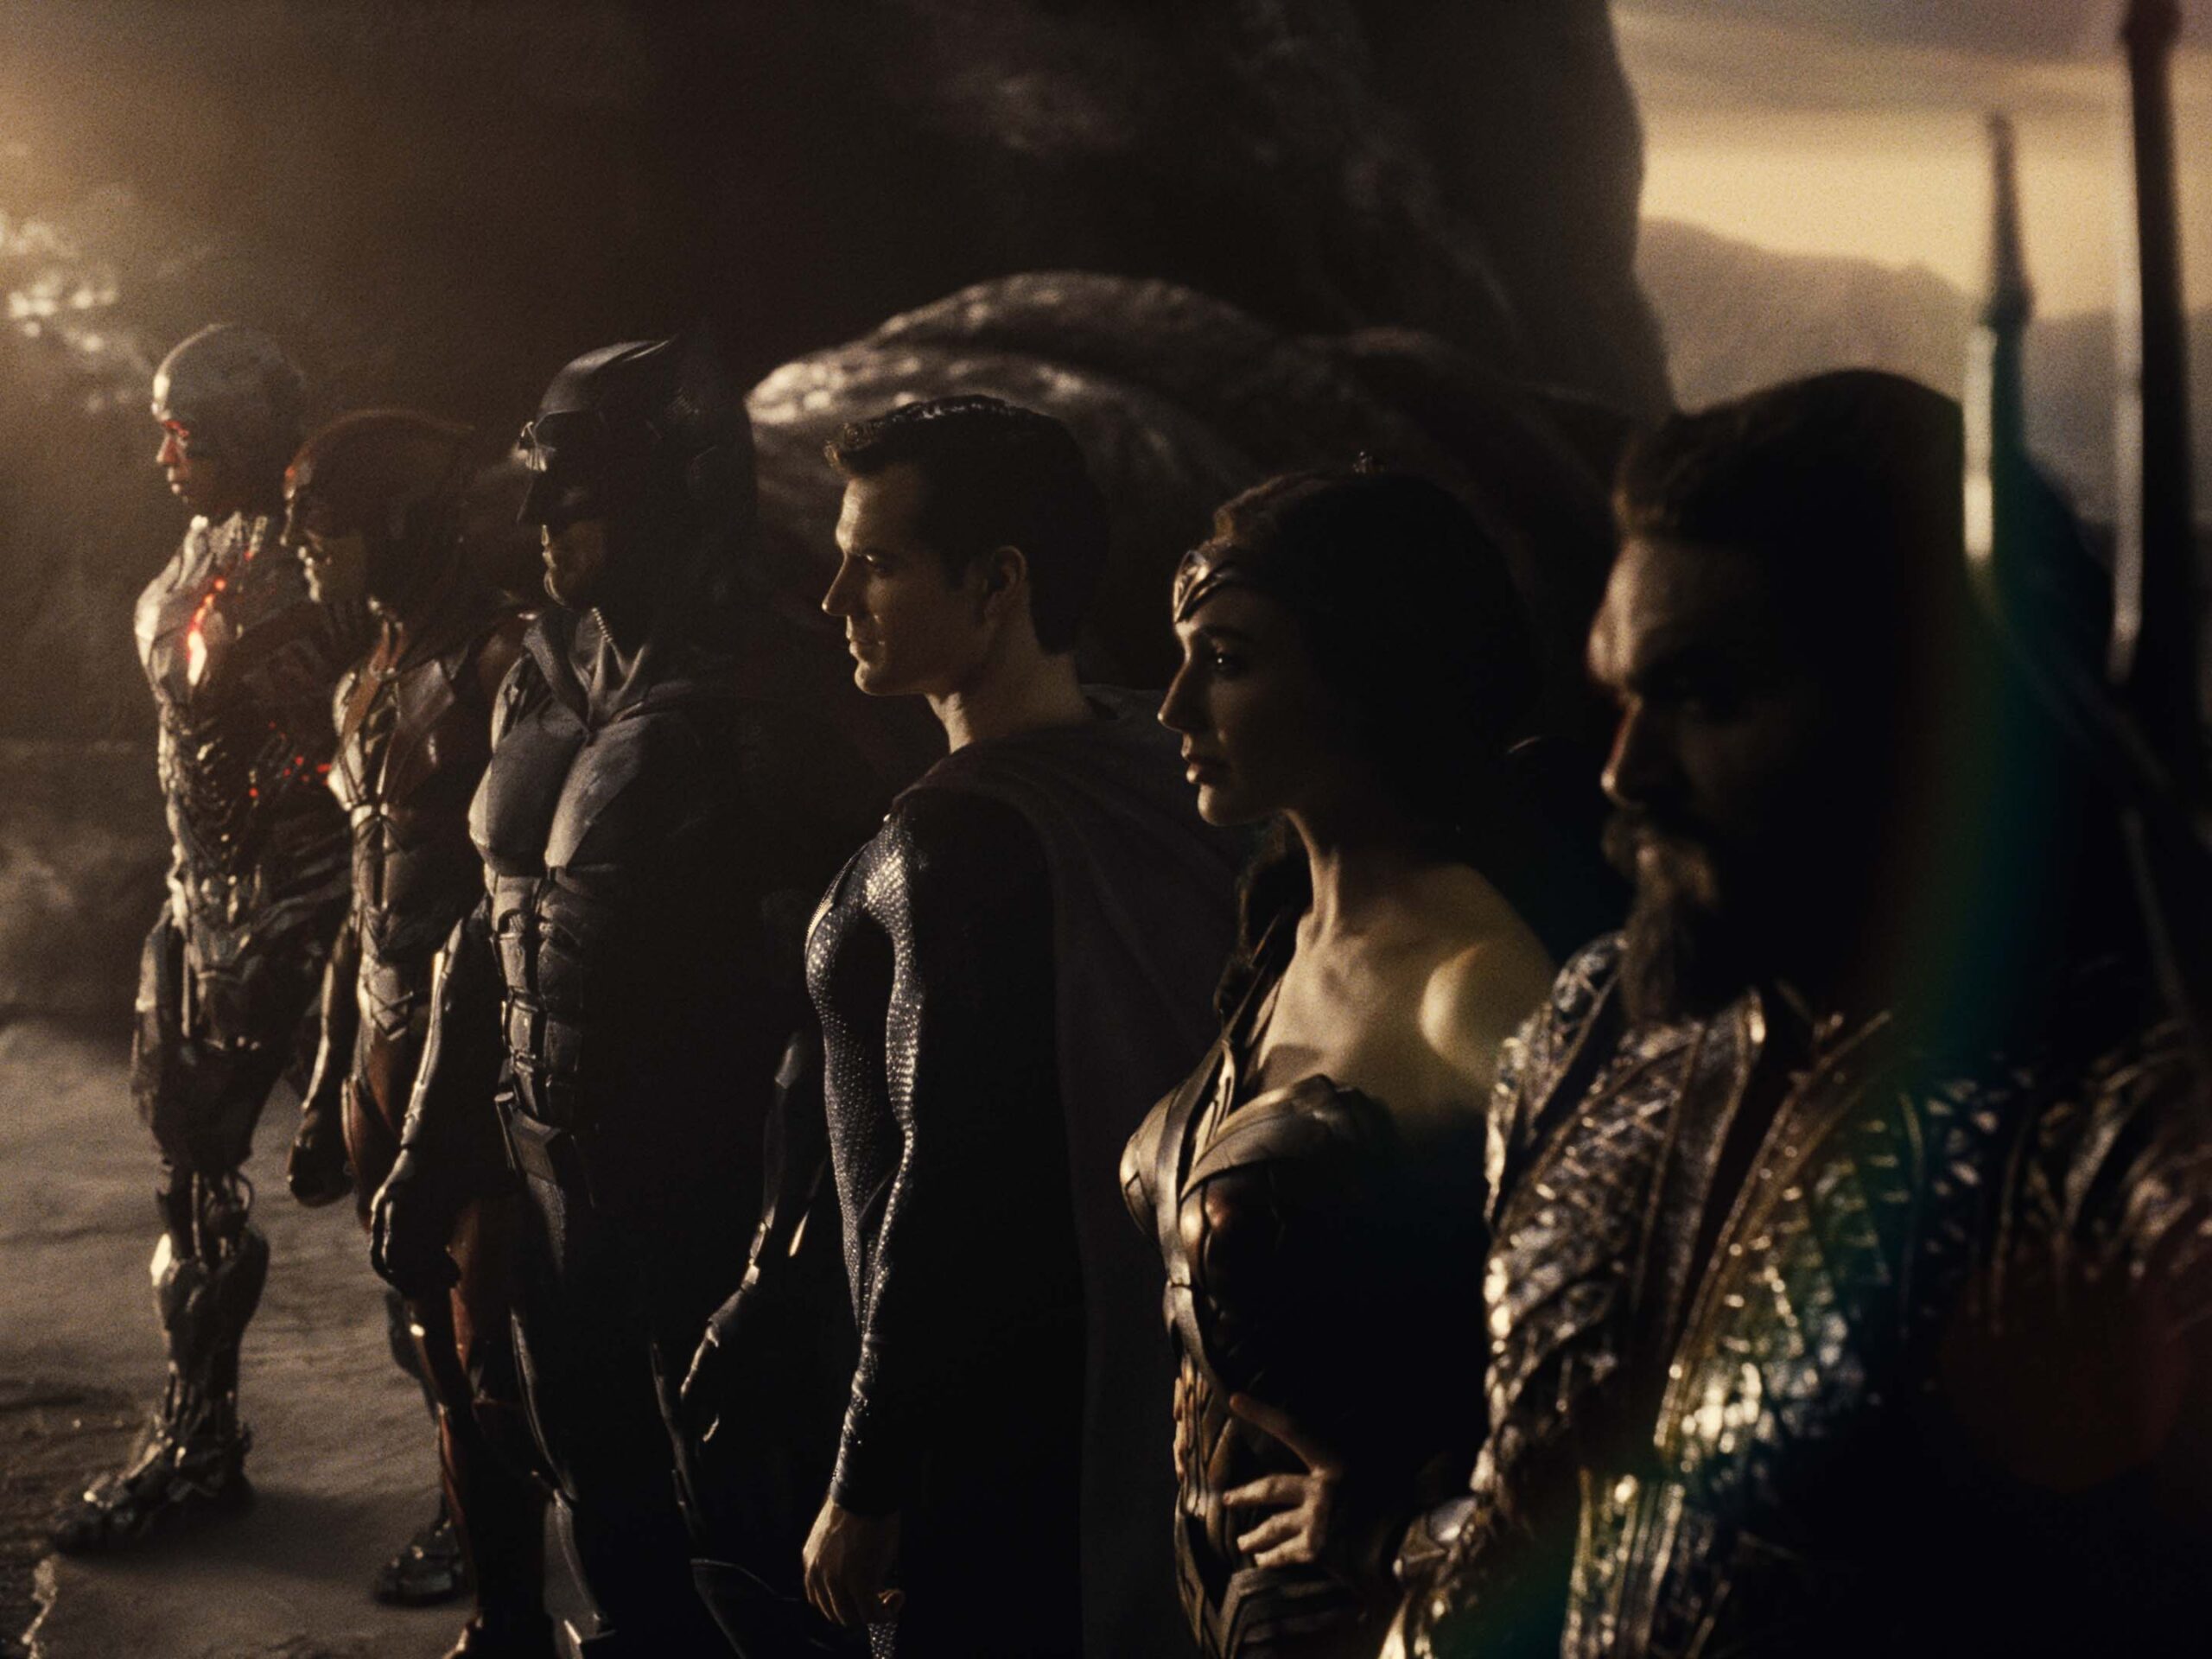 Ray Fisher as Cyborg, Ezra Miller as The Flash, Ben Affleck as Batman, Henry Cavill as Superman, Gal Gadot as Wonder Woman, and Jason Momoa as Aquaman in Zack Snyder's Justice League